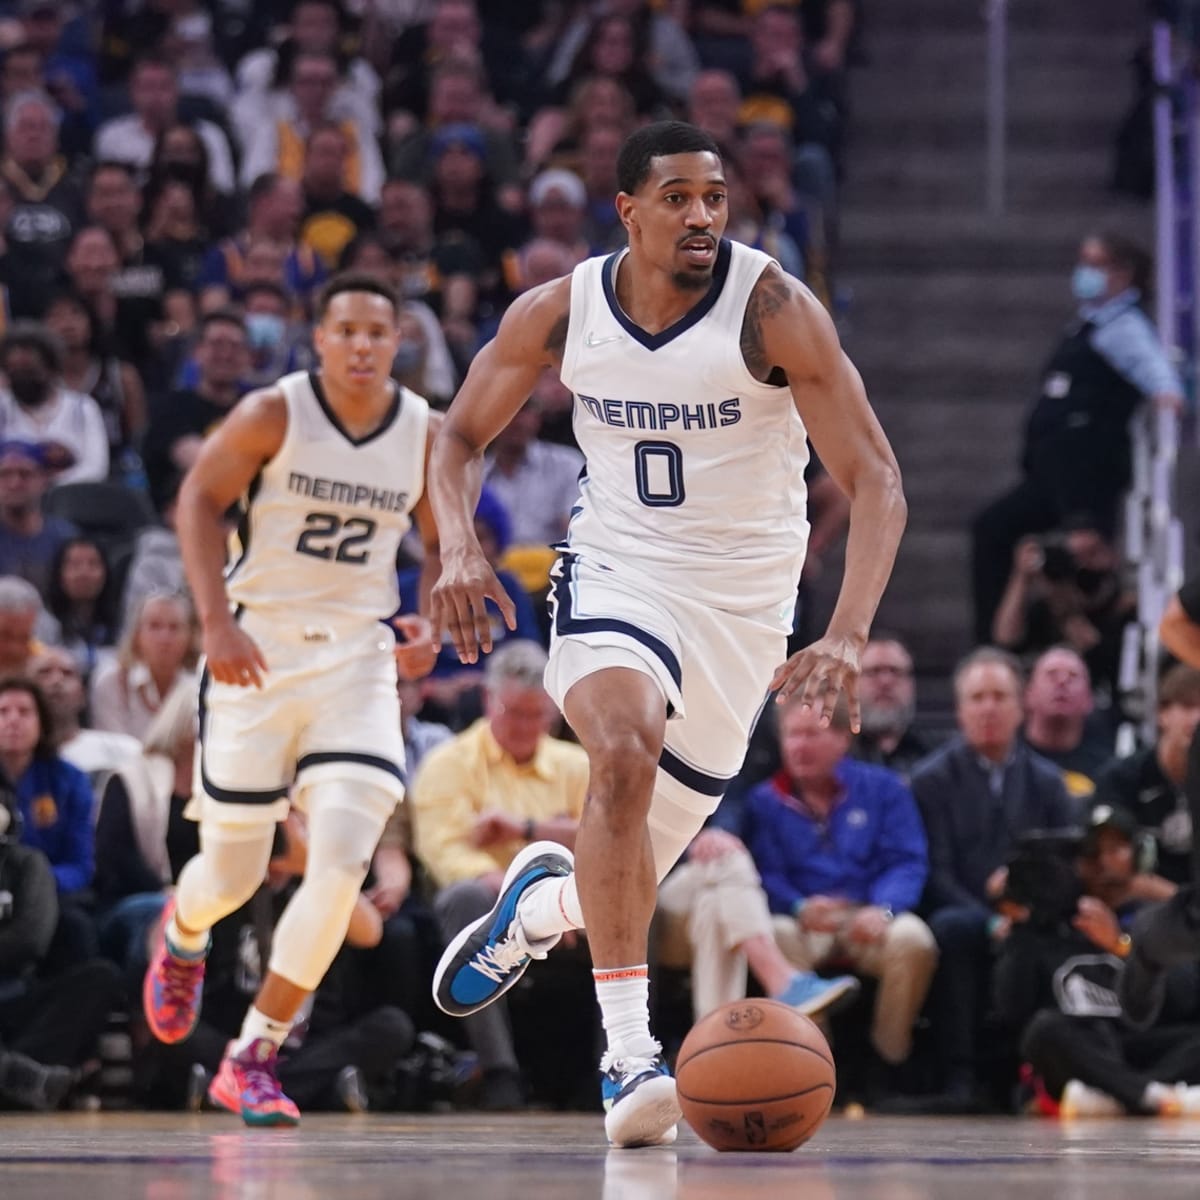 De'Anthony Melton is Making the Most of His NBA Opportunity